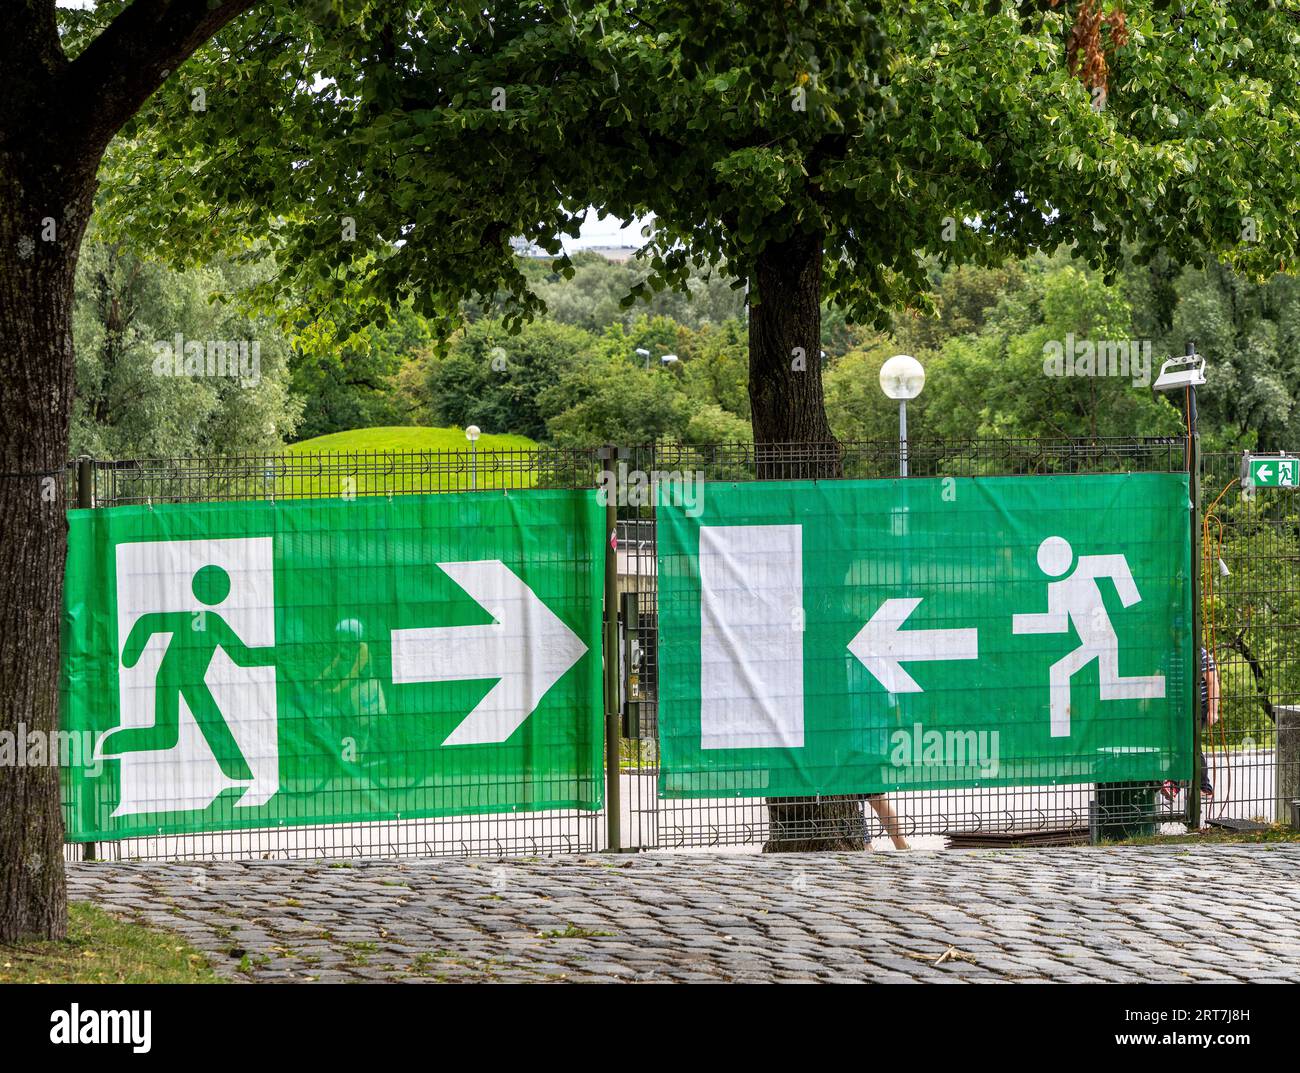 Construction Fence With Sign For Escape Route, Munich, Bavaria, Germany Stock Photo